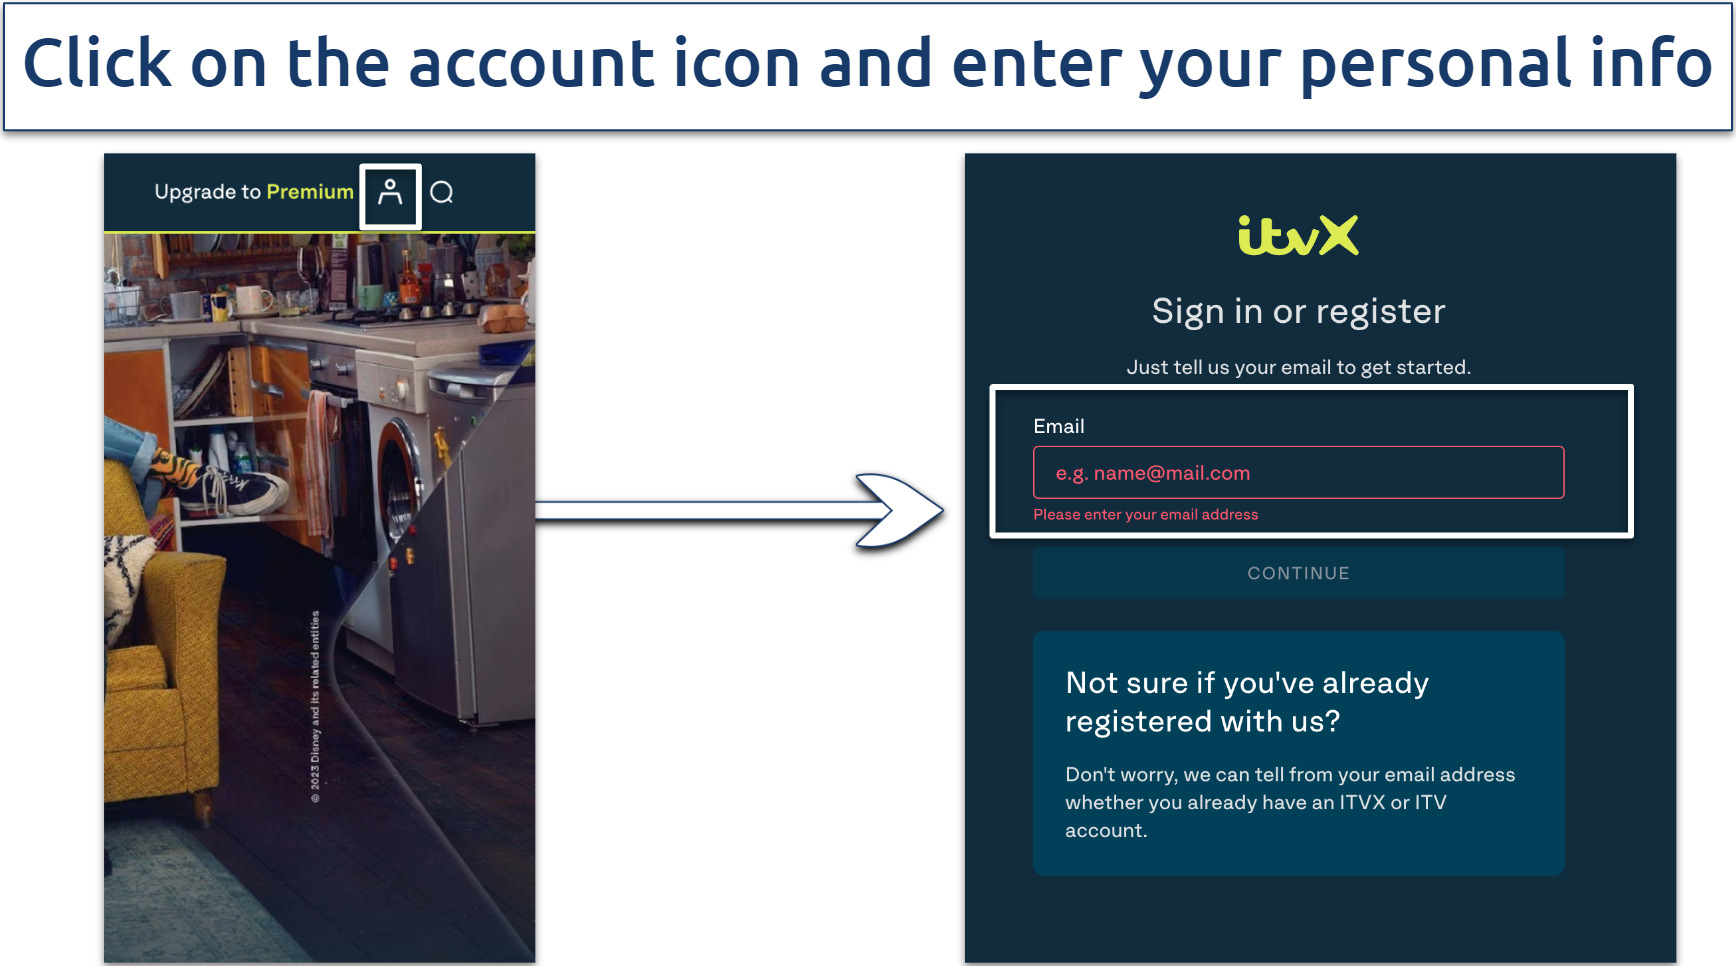 Screenshot of the ITVX sign up process